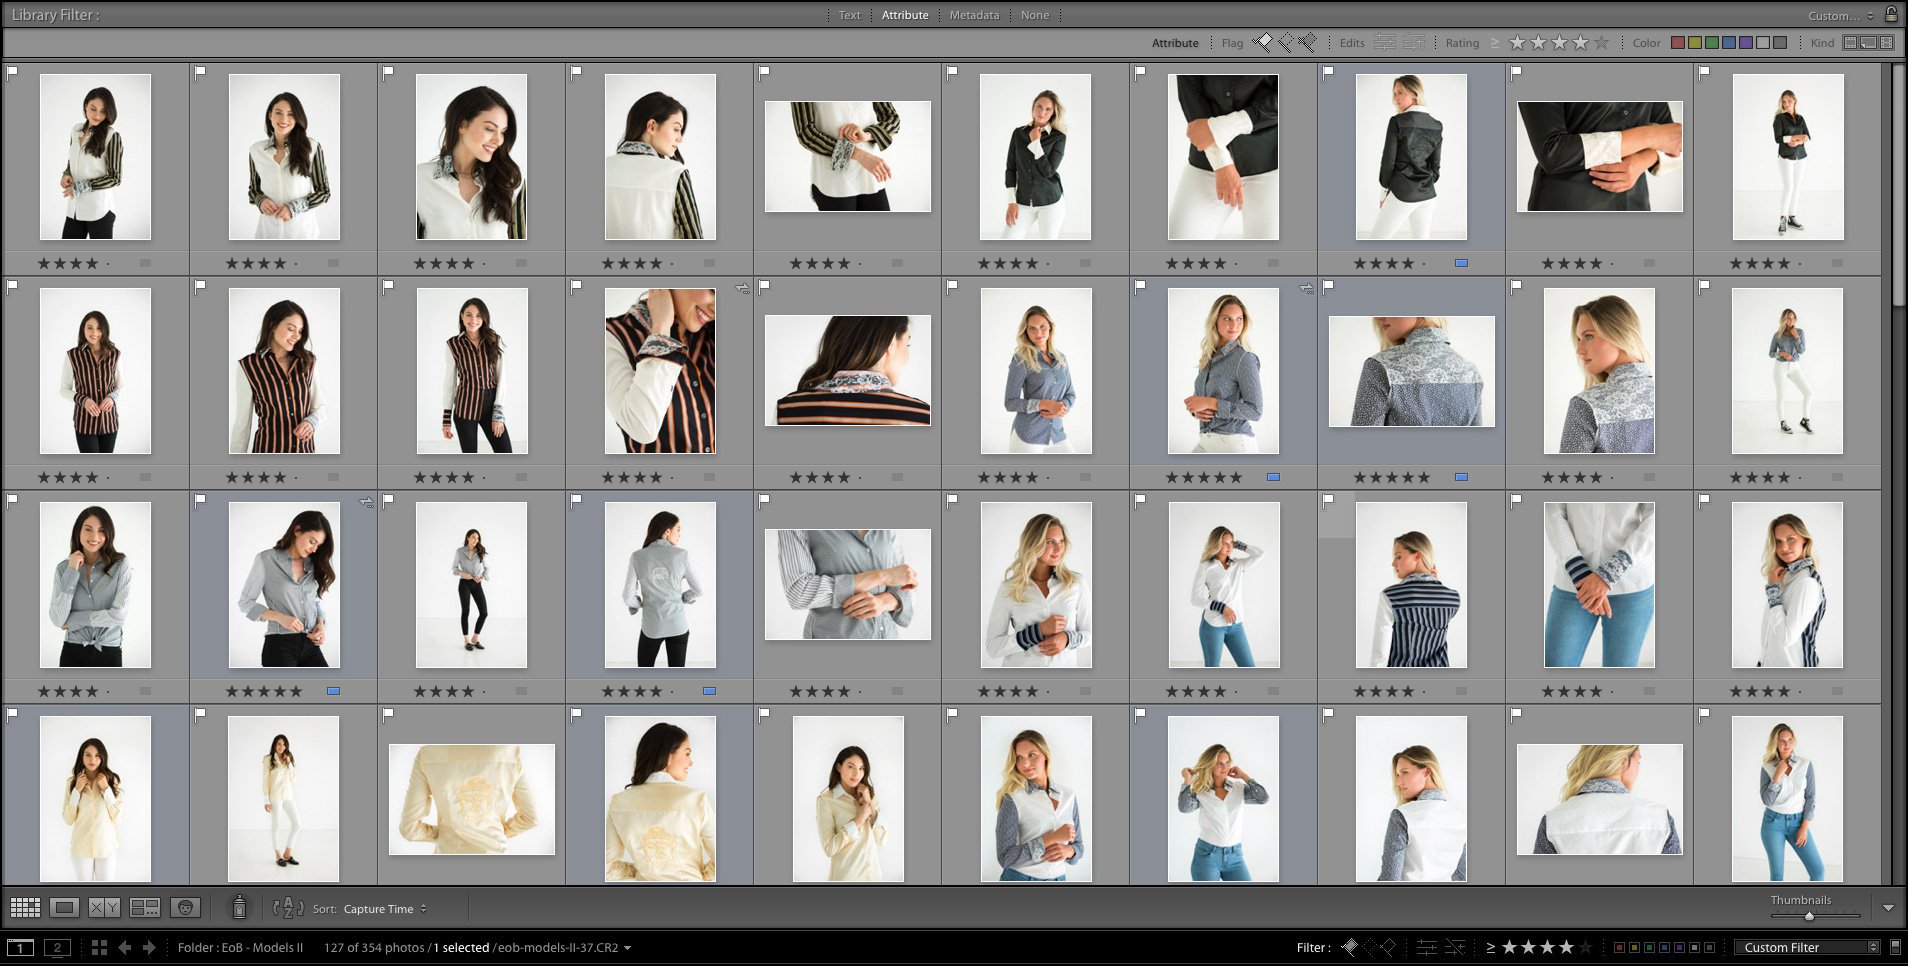 How We Use Lightroom to Cull, Sort, and Rate Our Photo Shoots